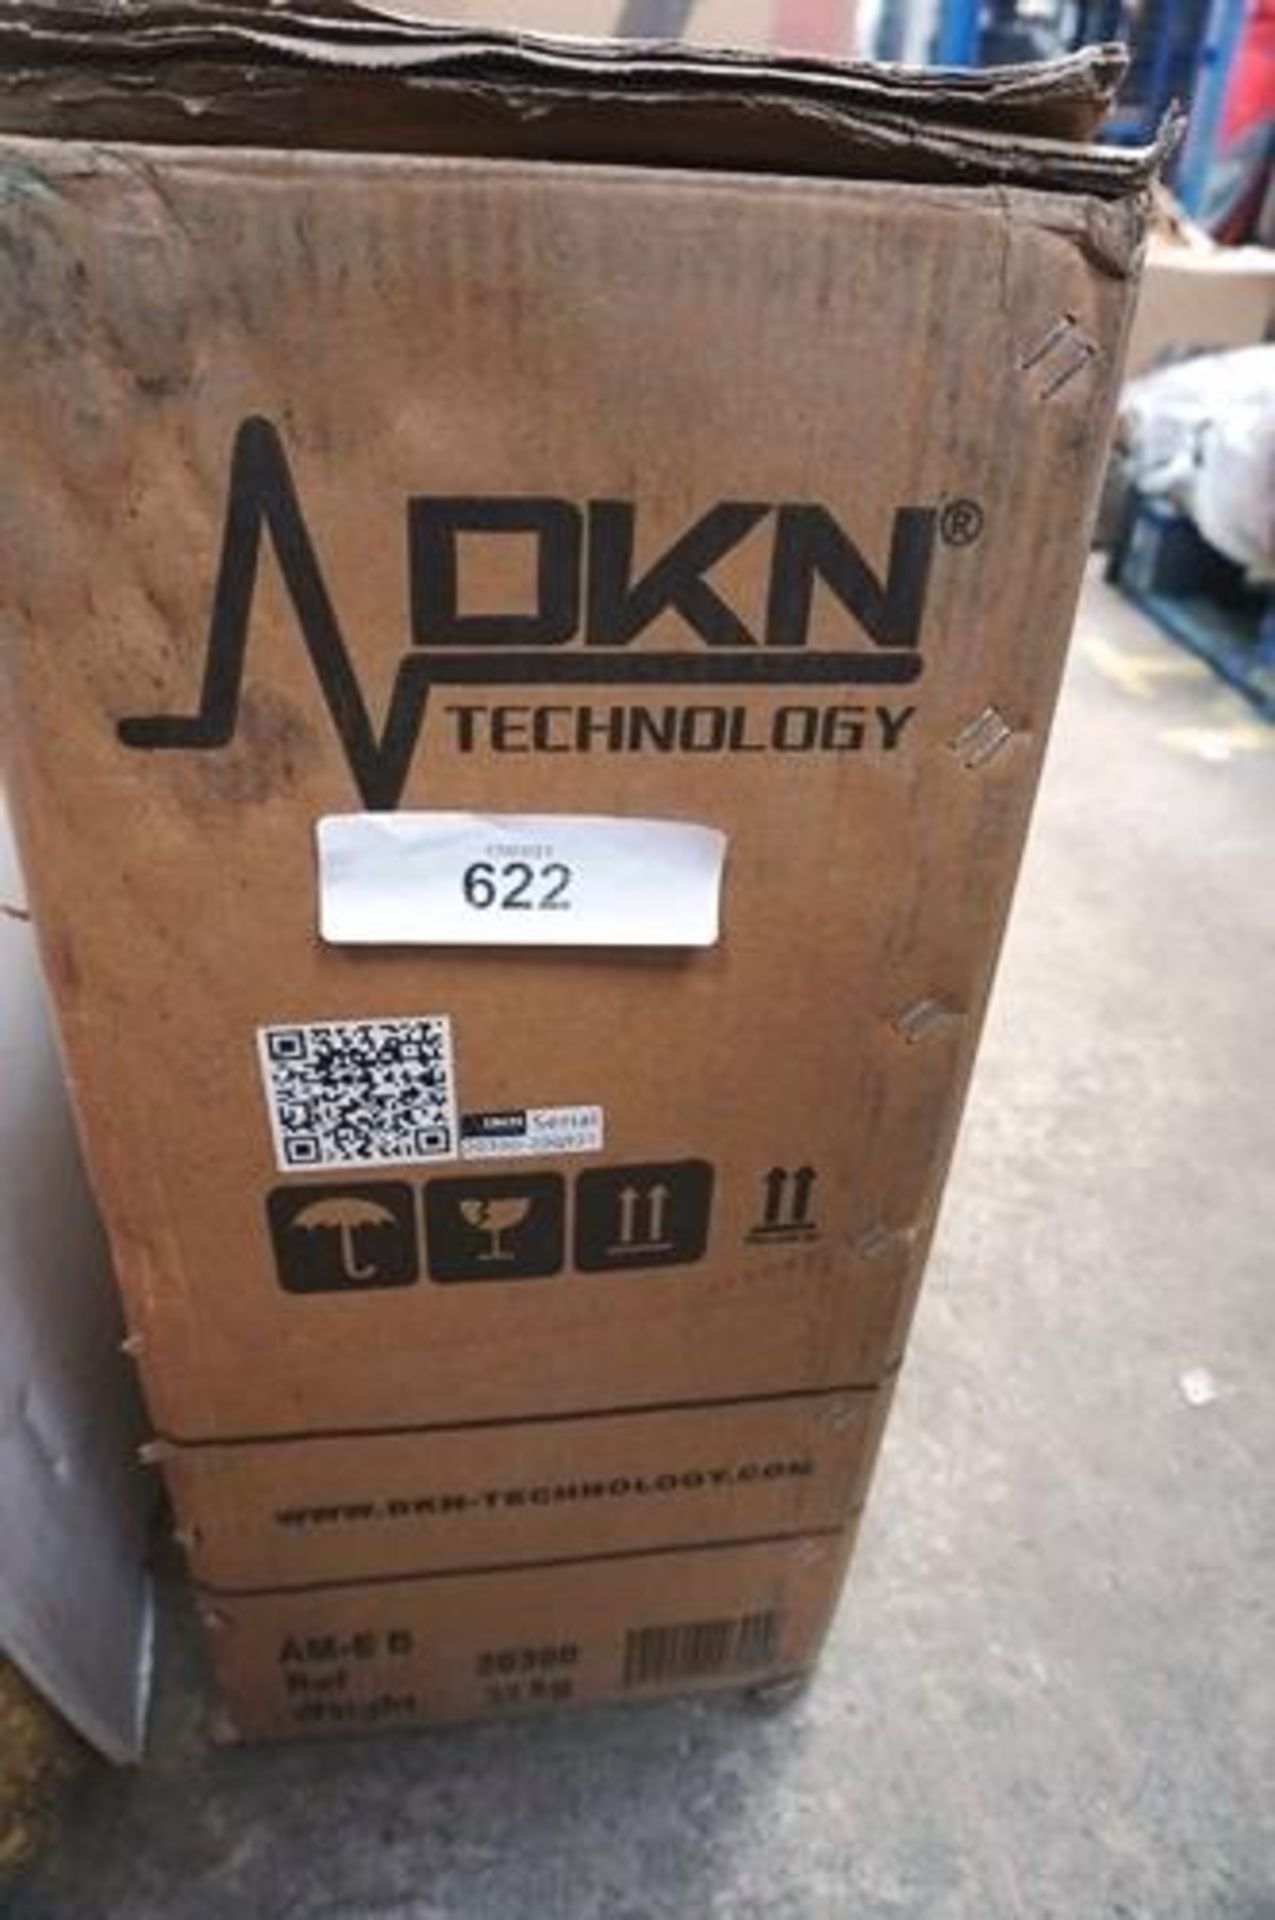 1 x DKN Technology AM-EB cycling machine - Sealed new in box (GSF17) - Image 2 of 2